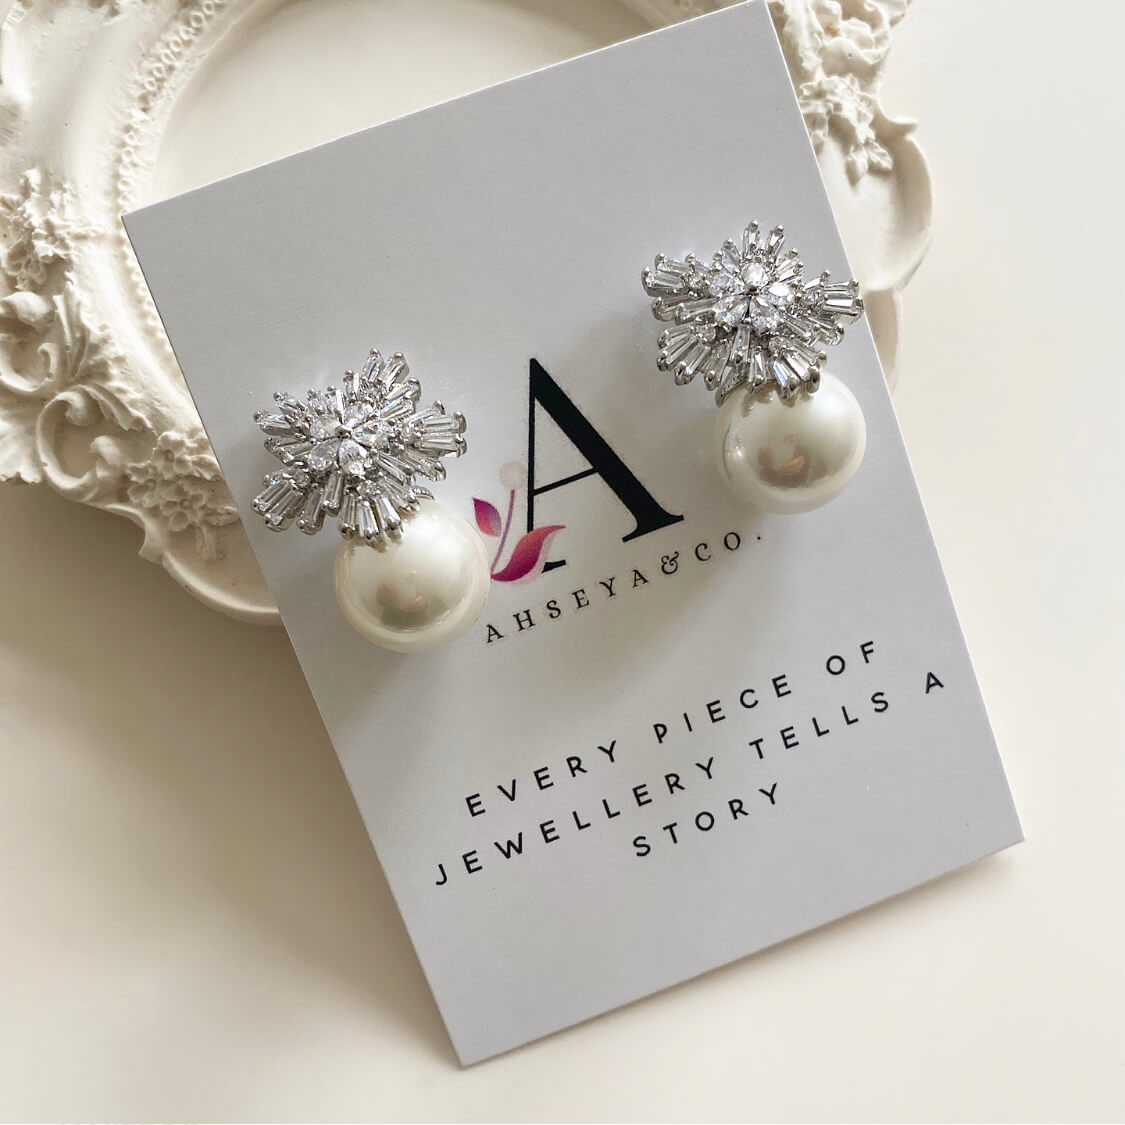 These lovely pearl cluster earrings feature a classic pearl, surrounded by a cluster of sparkling cubic zirconia crystals. The combination of luminescent pearl and sparkling crystals make these earrings the perfect choice for any special occasion.